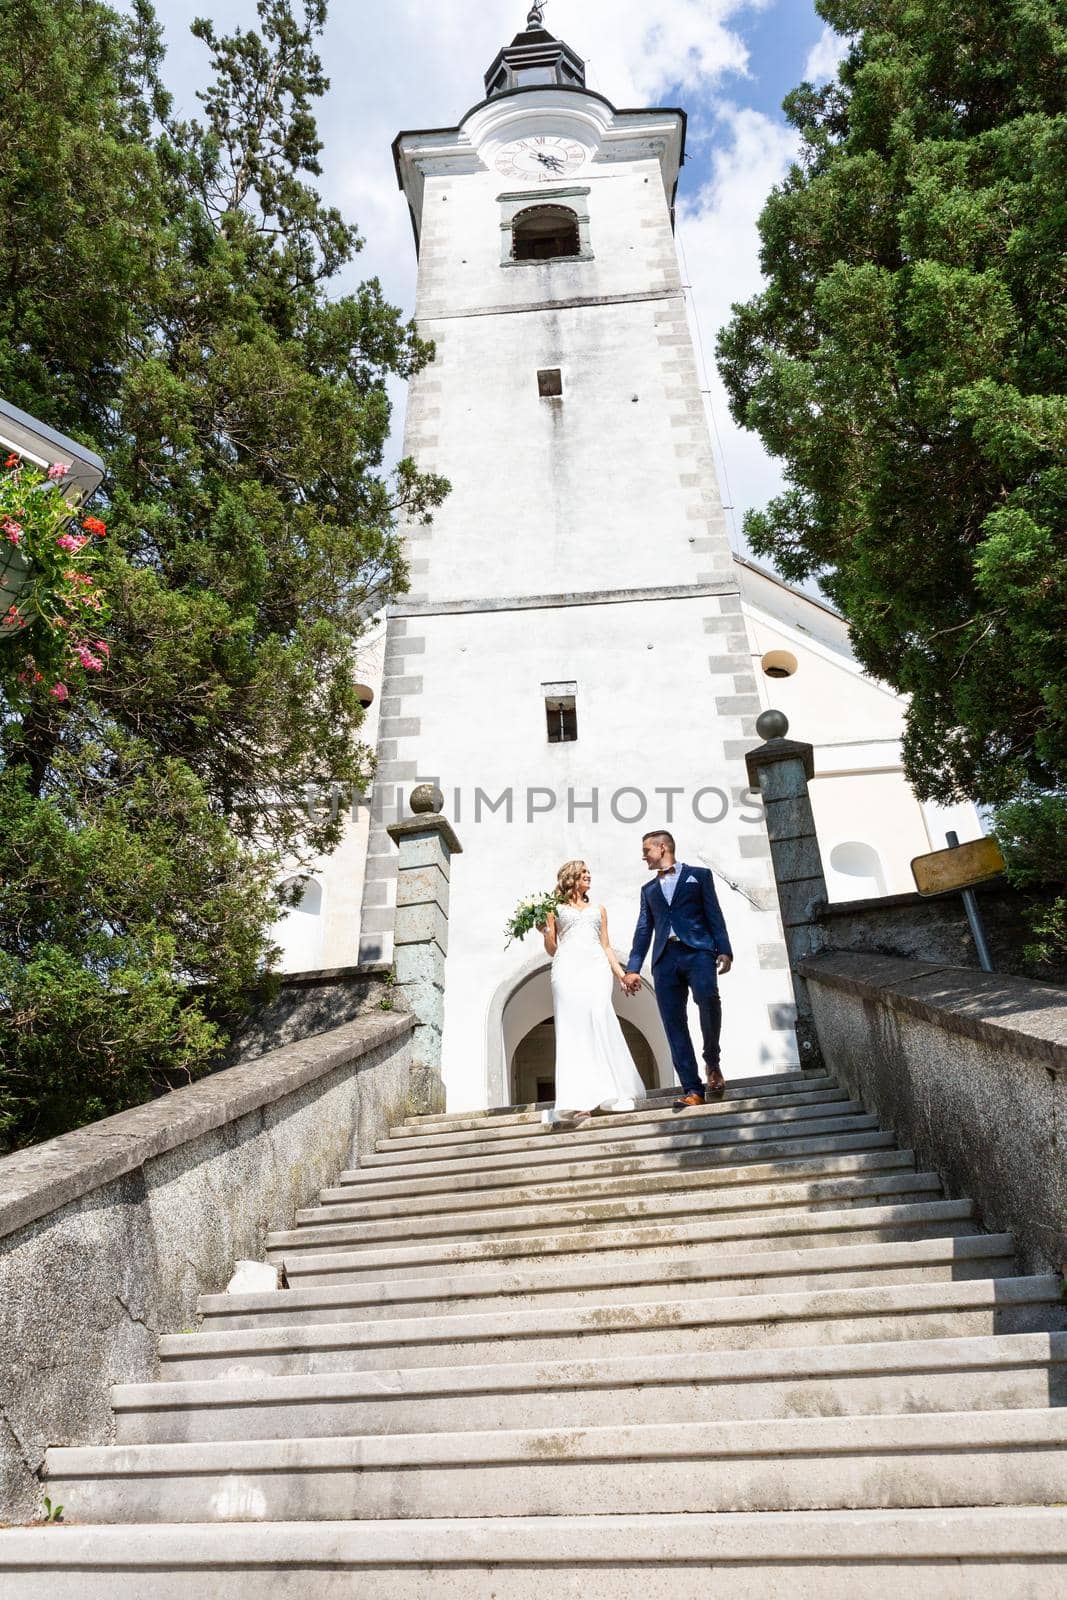 The Kiss. Bride and groom kisses tenderly on a staircase in front of a small local church. by kasto